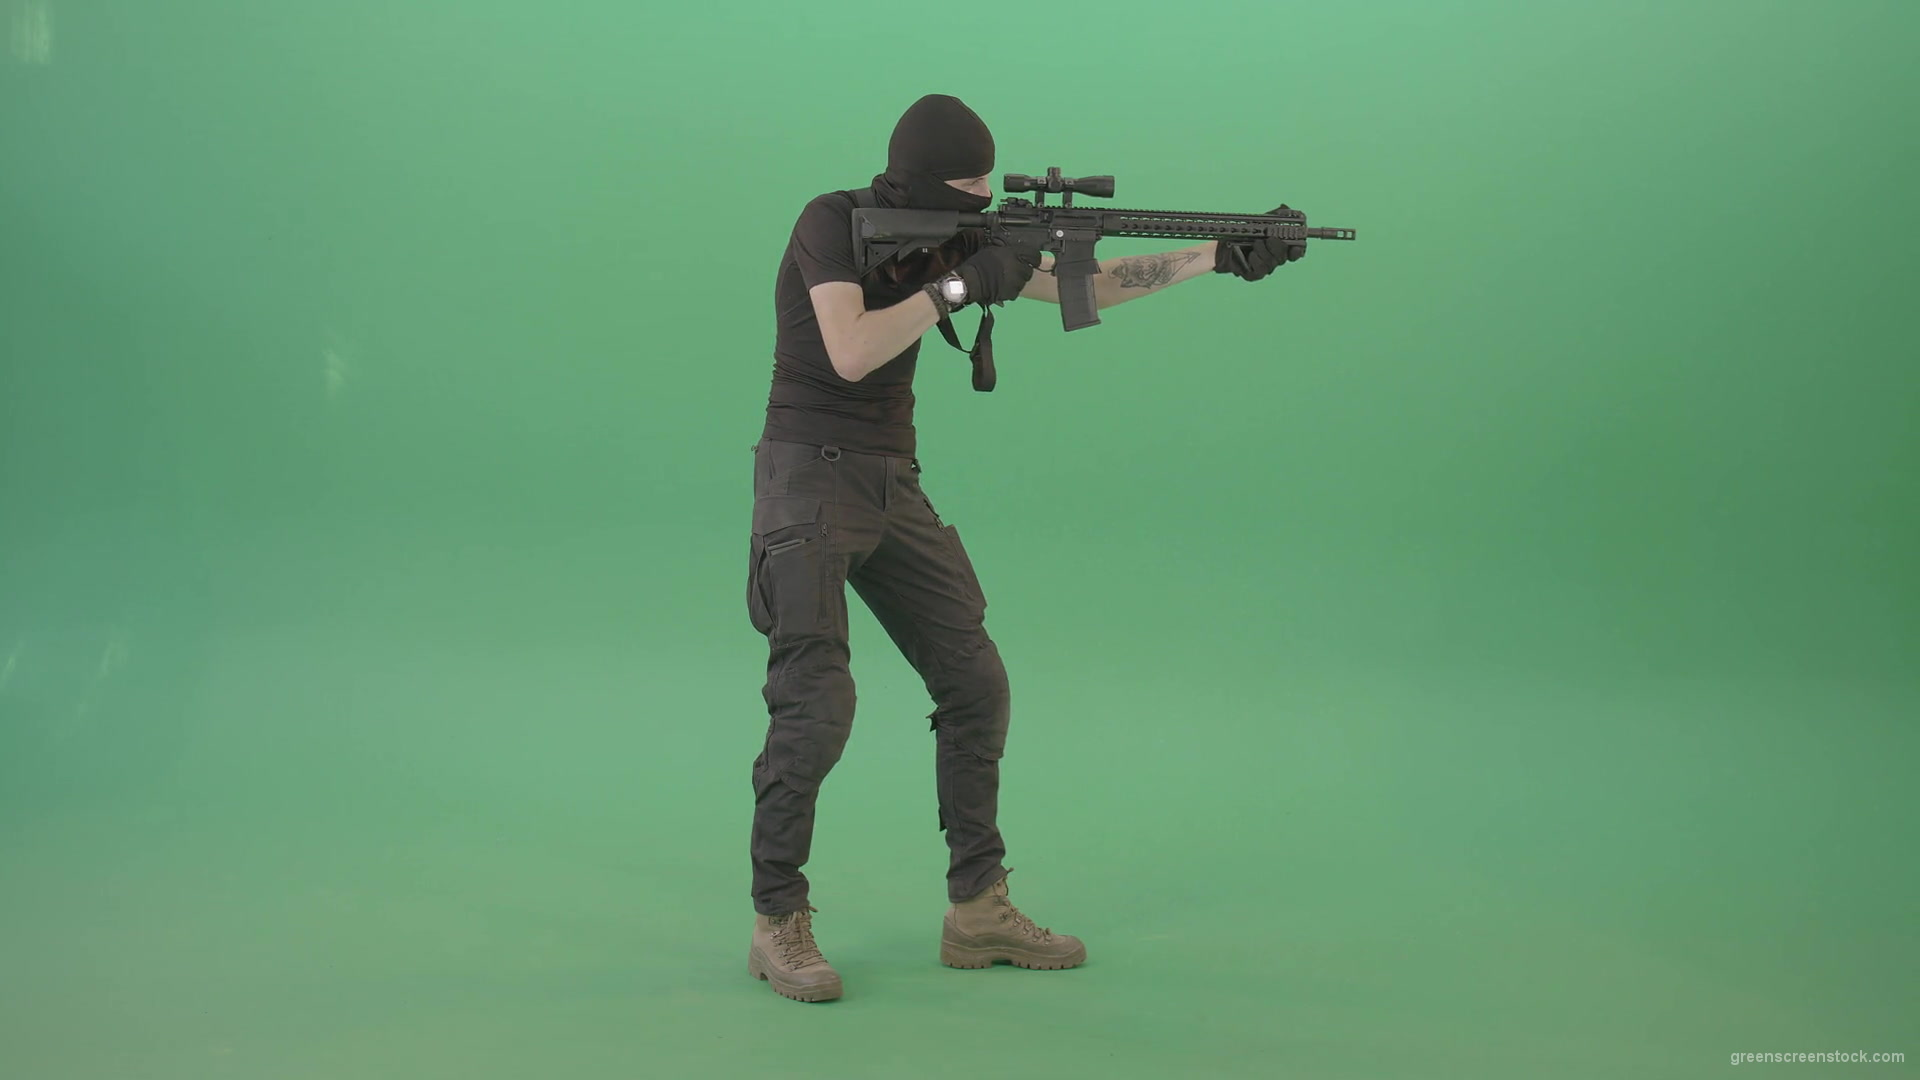 Army-soldier-shooting-with-gun-on-green-screen-4K-Video-Clip-1920_005 Green Screen Stock